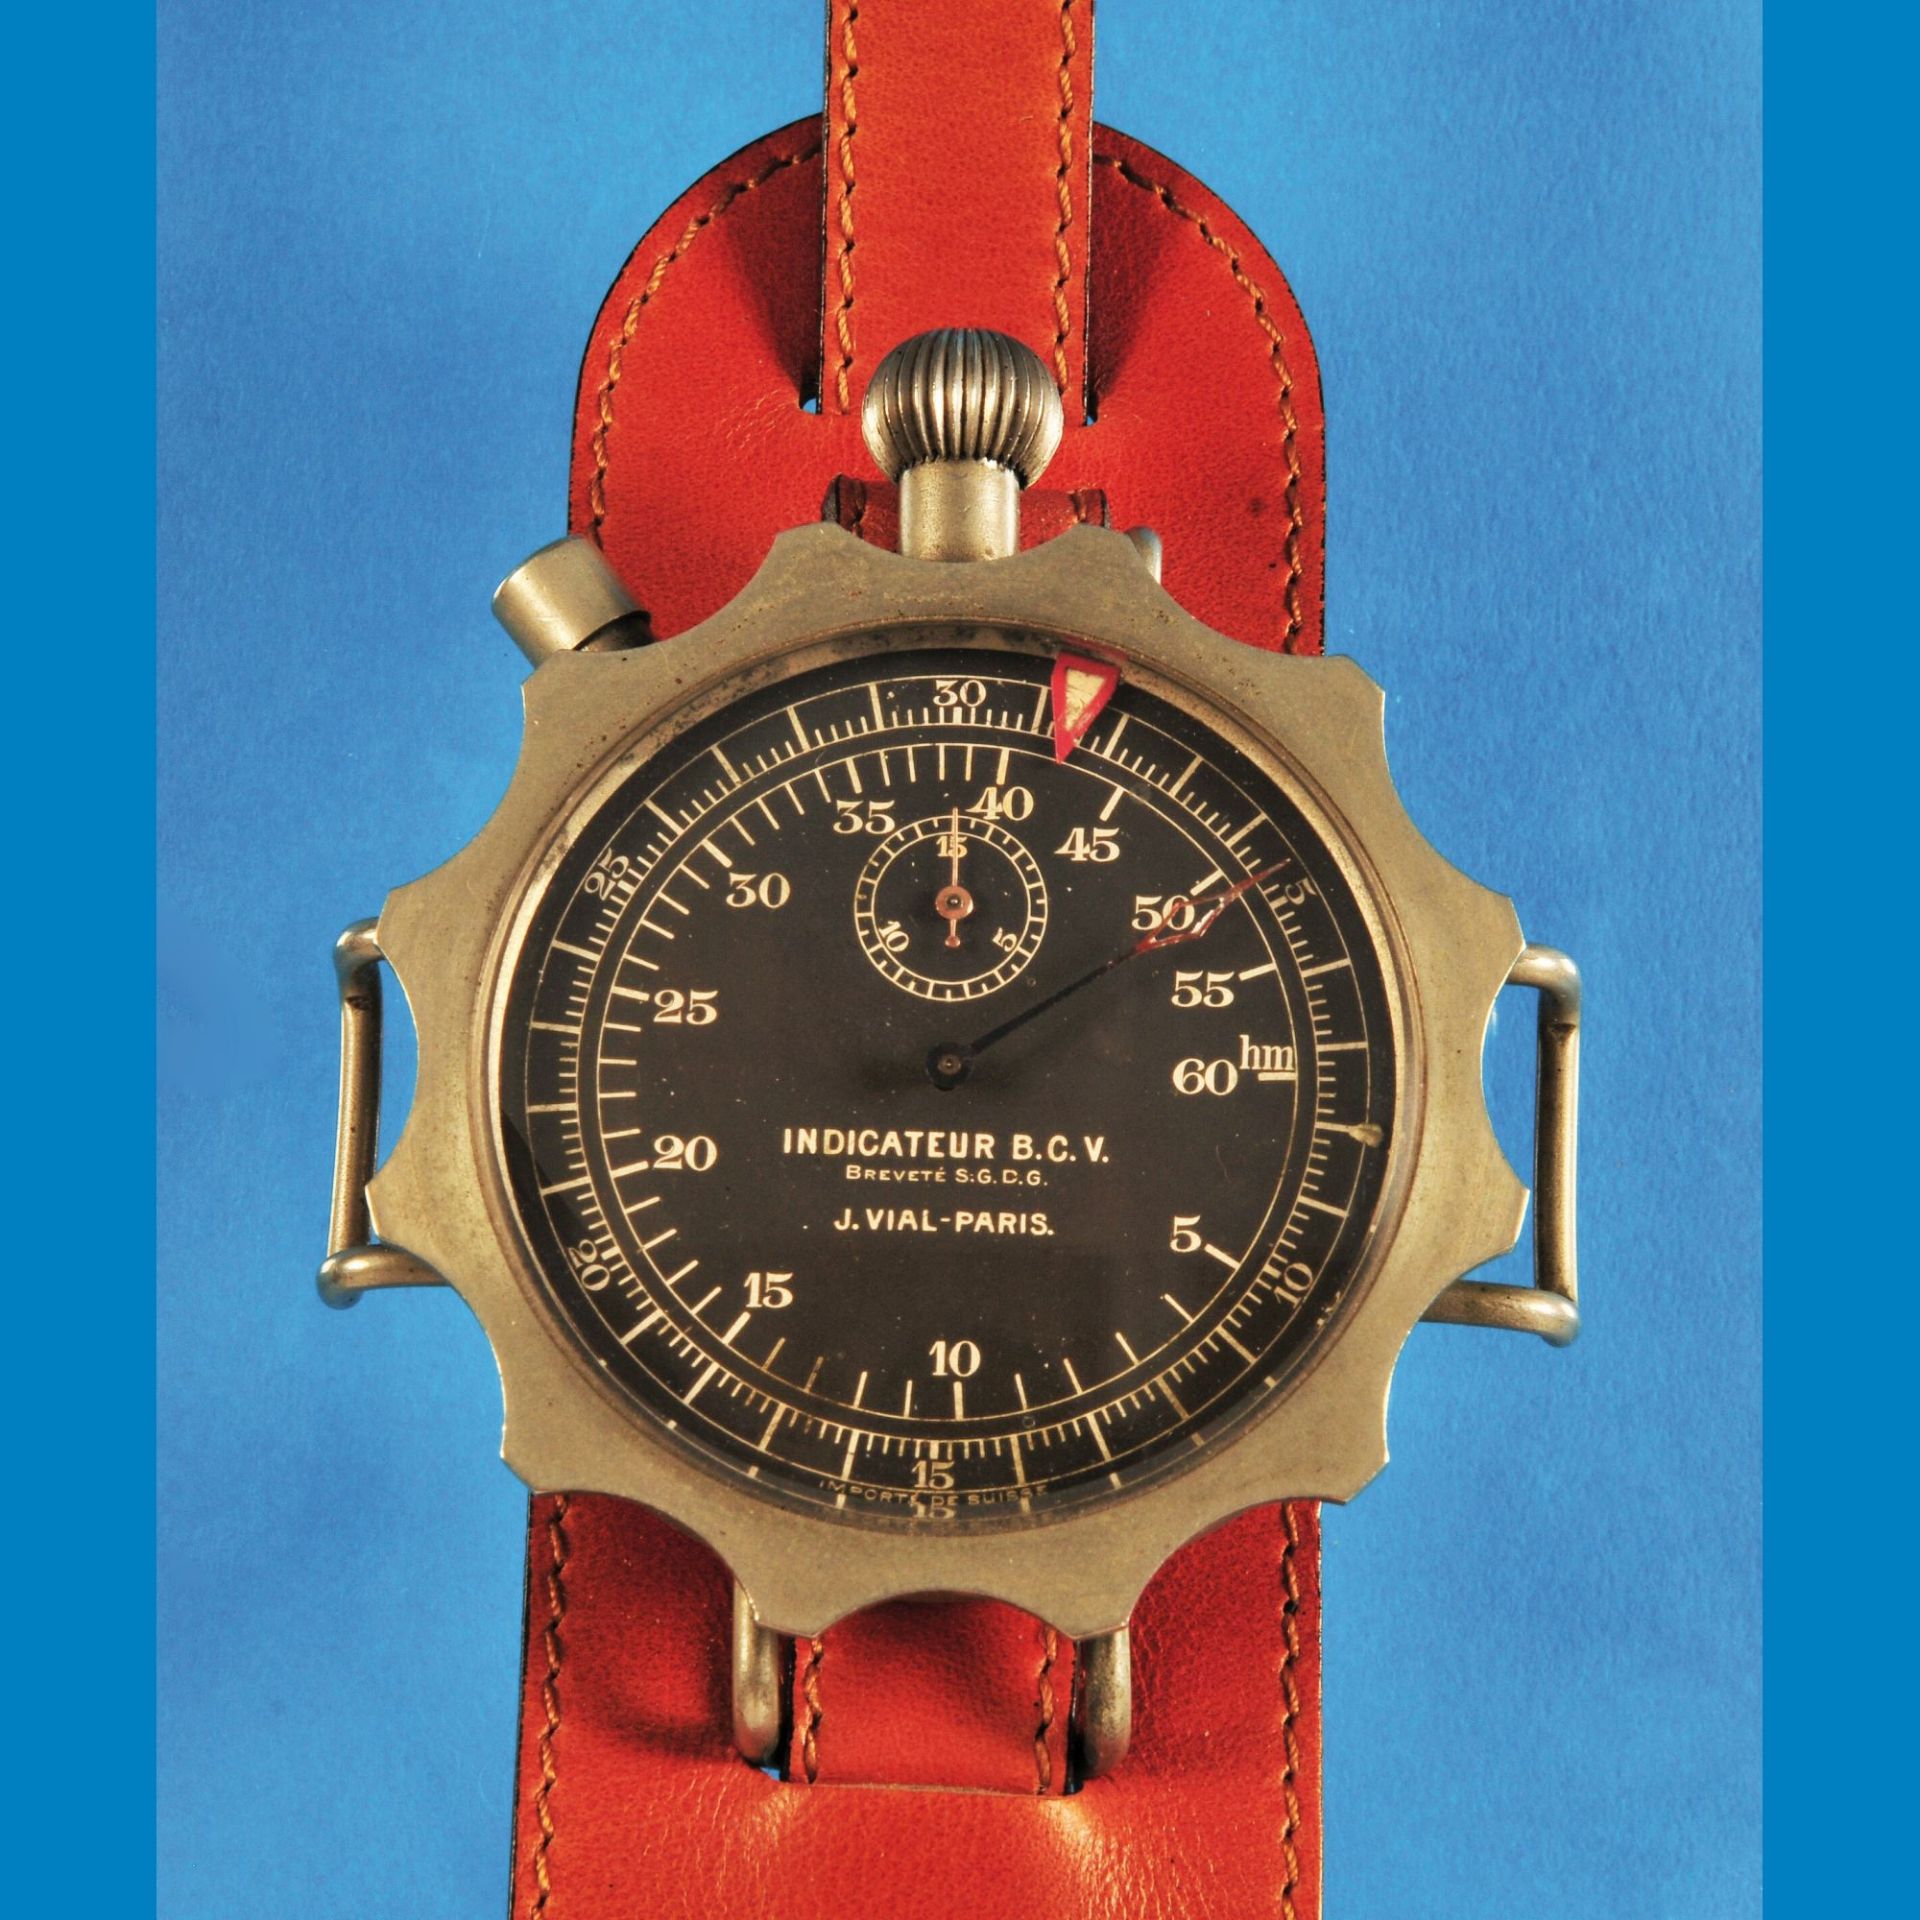 Bomb dropping watch, Minerva, for the French Air Force, "Chronografo di Retorno", Indicateur B.C.V.